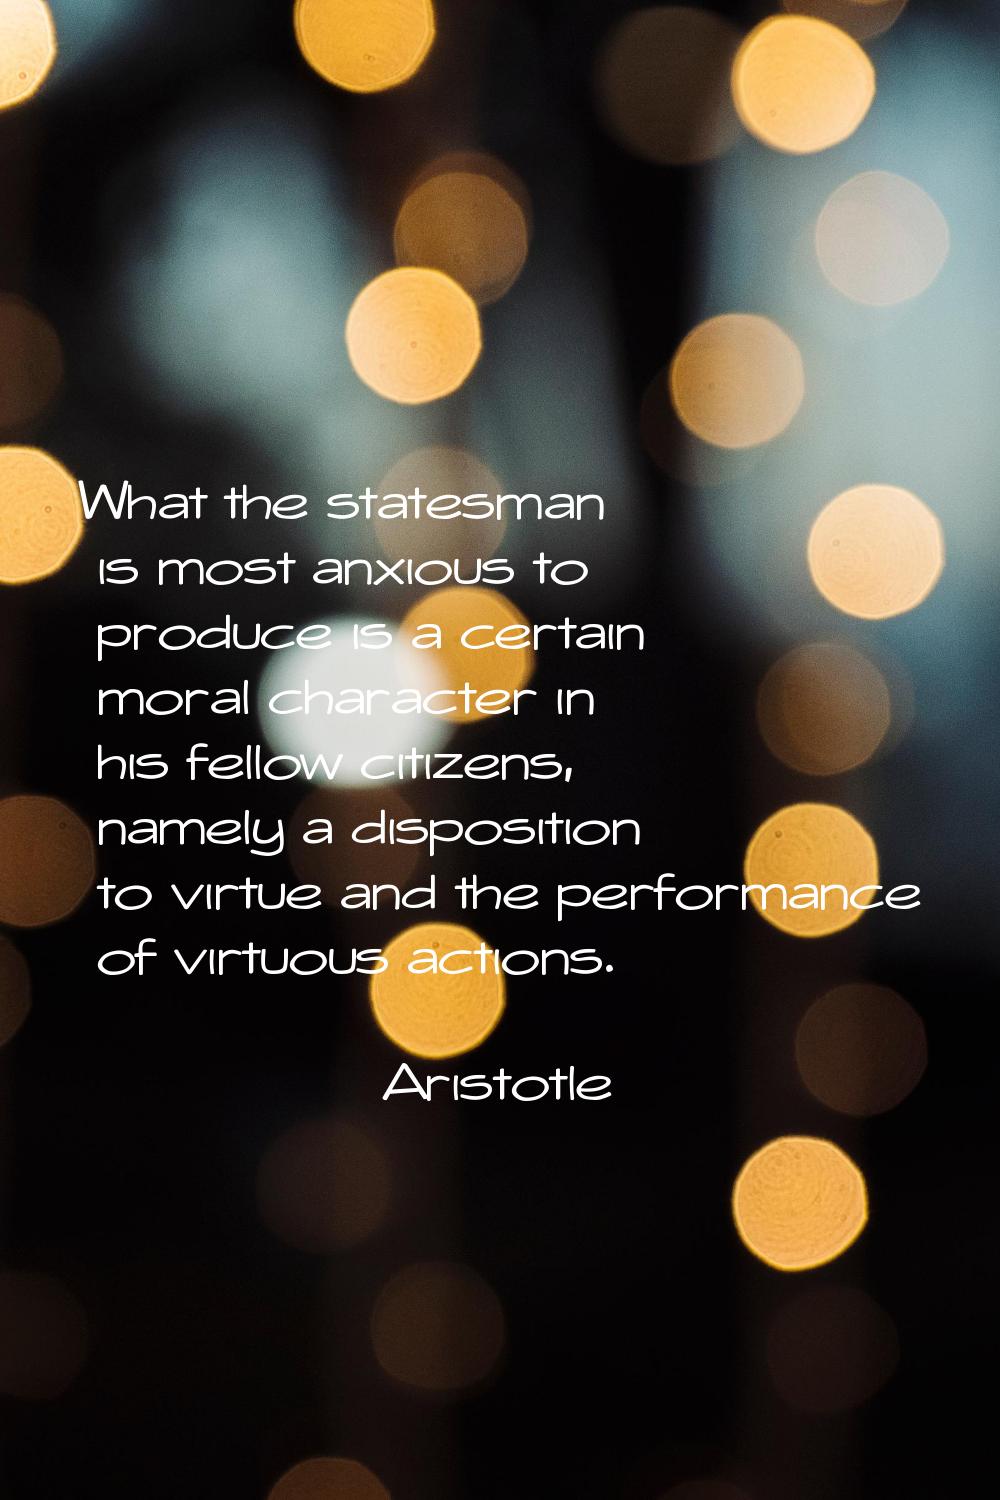 What the statesman is most anxious to produce is a certain moral character in his fellow citizens, 